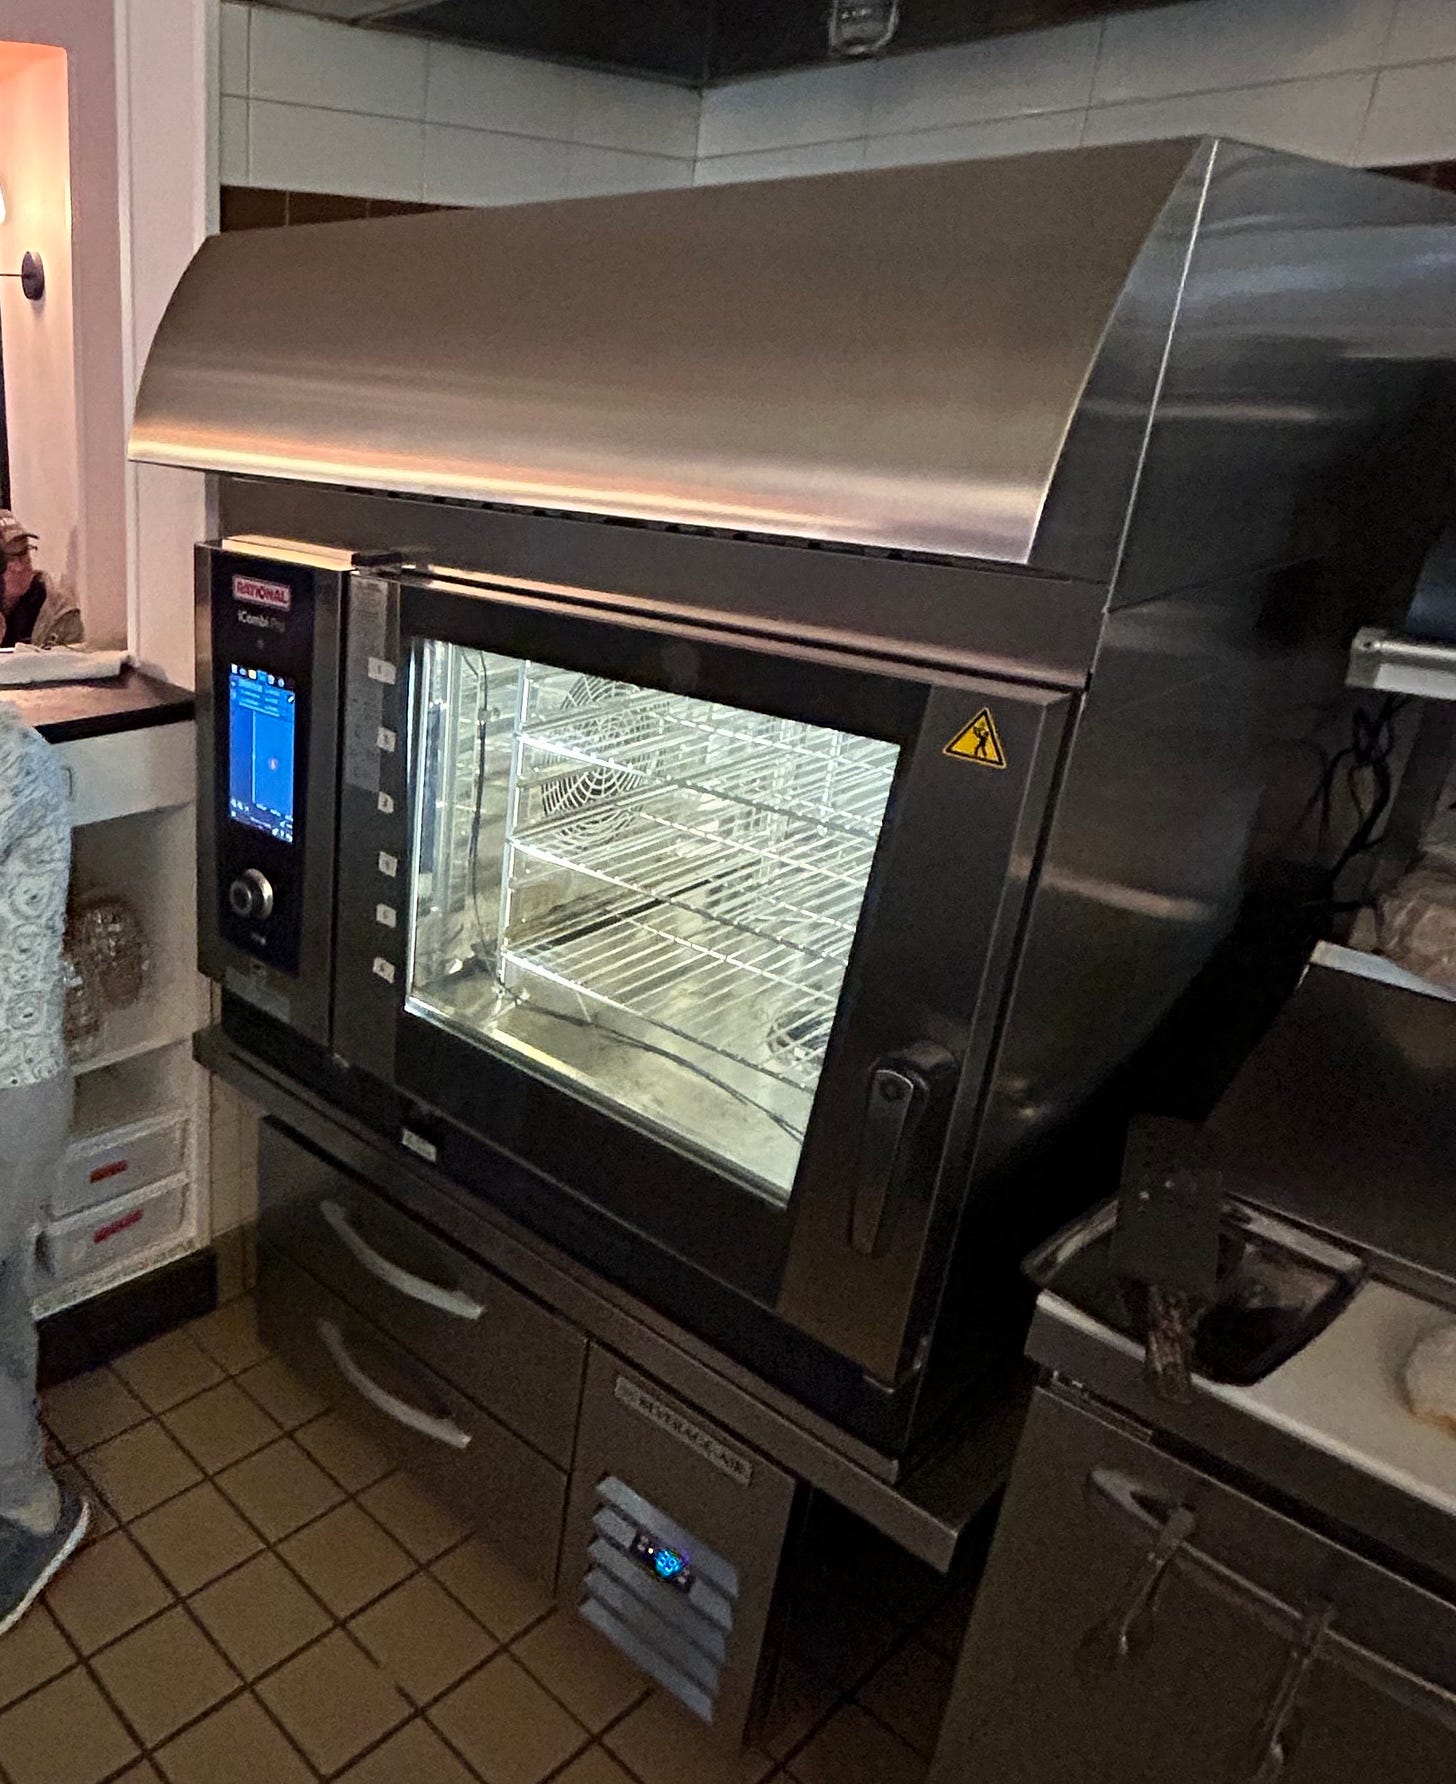 A large industrial oven with a touch screen on the side, within a kitchen